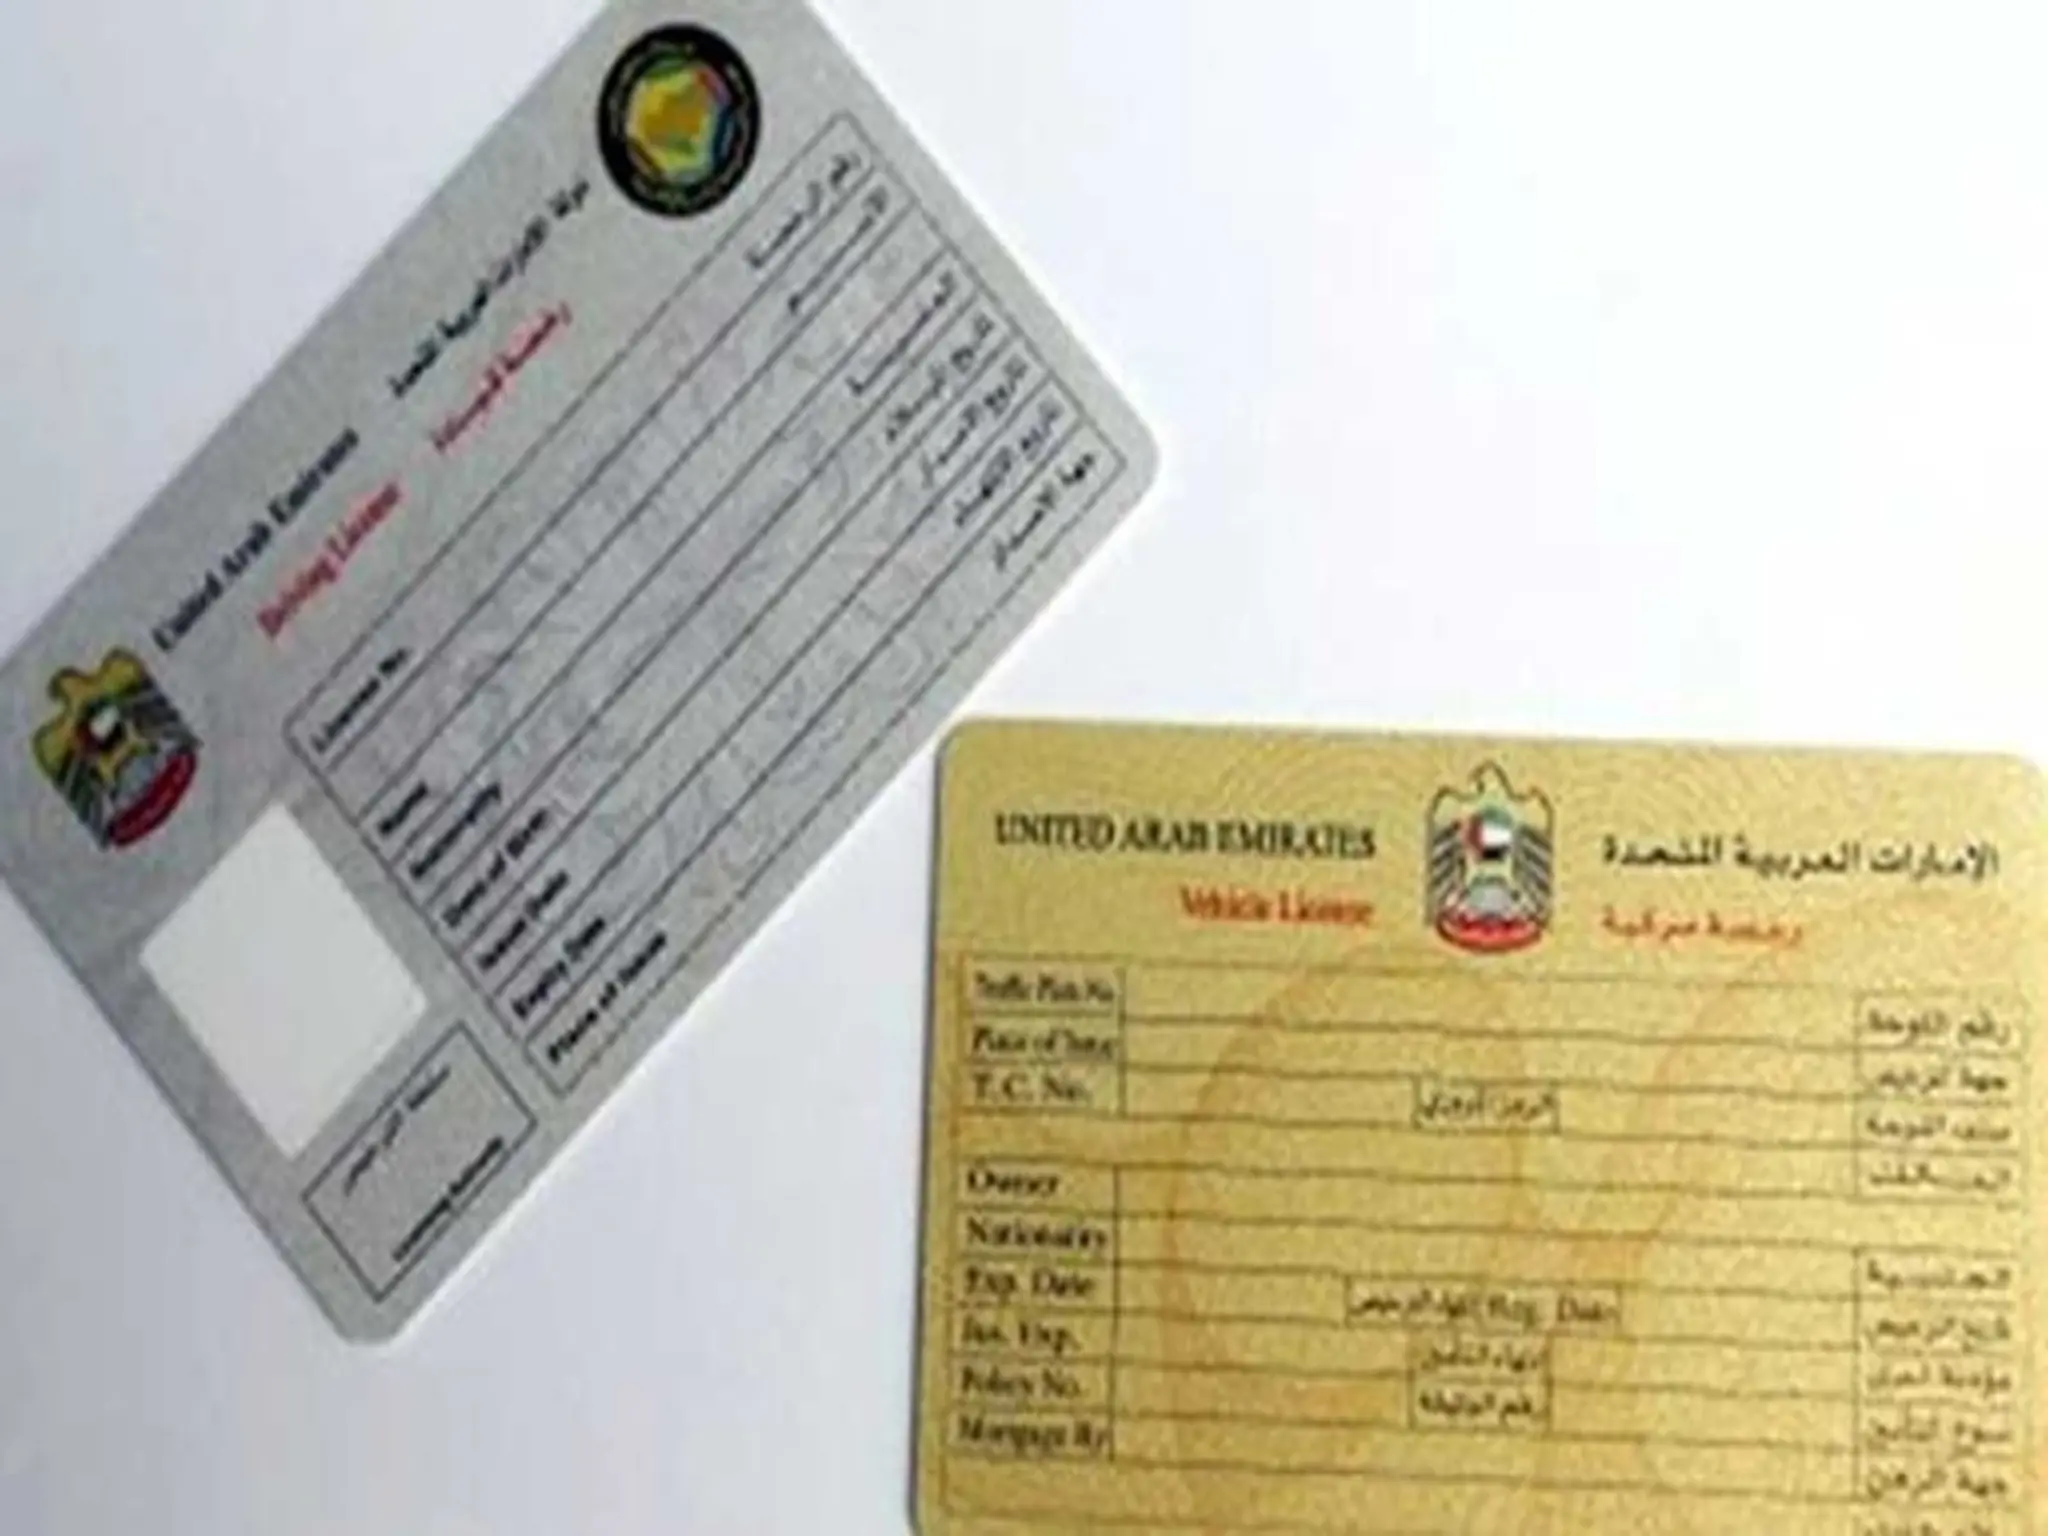 Obtaining a driving license in the Emirates without lessons through the Golden Opportunity service